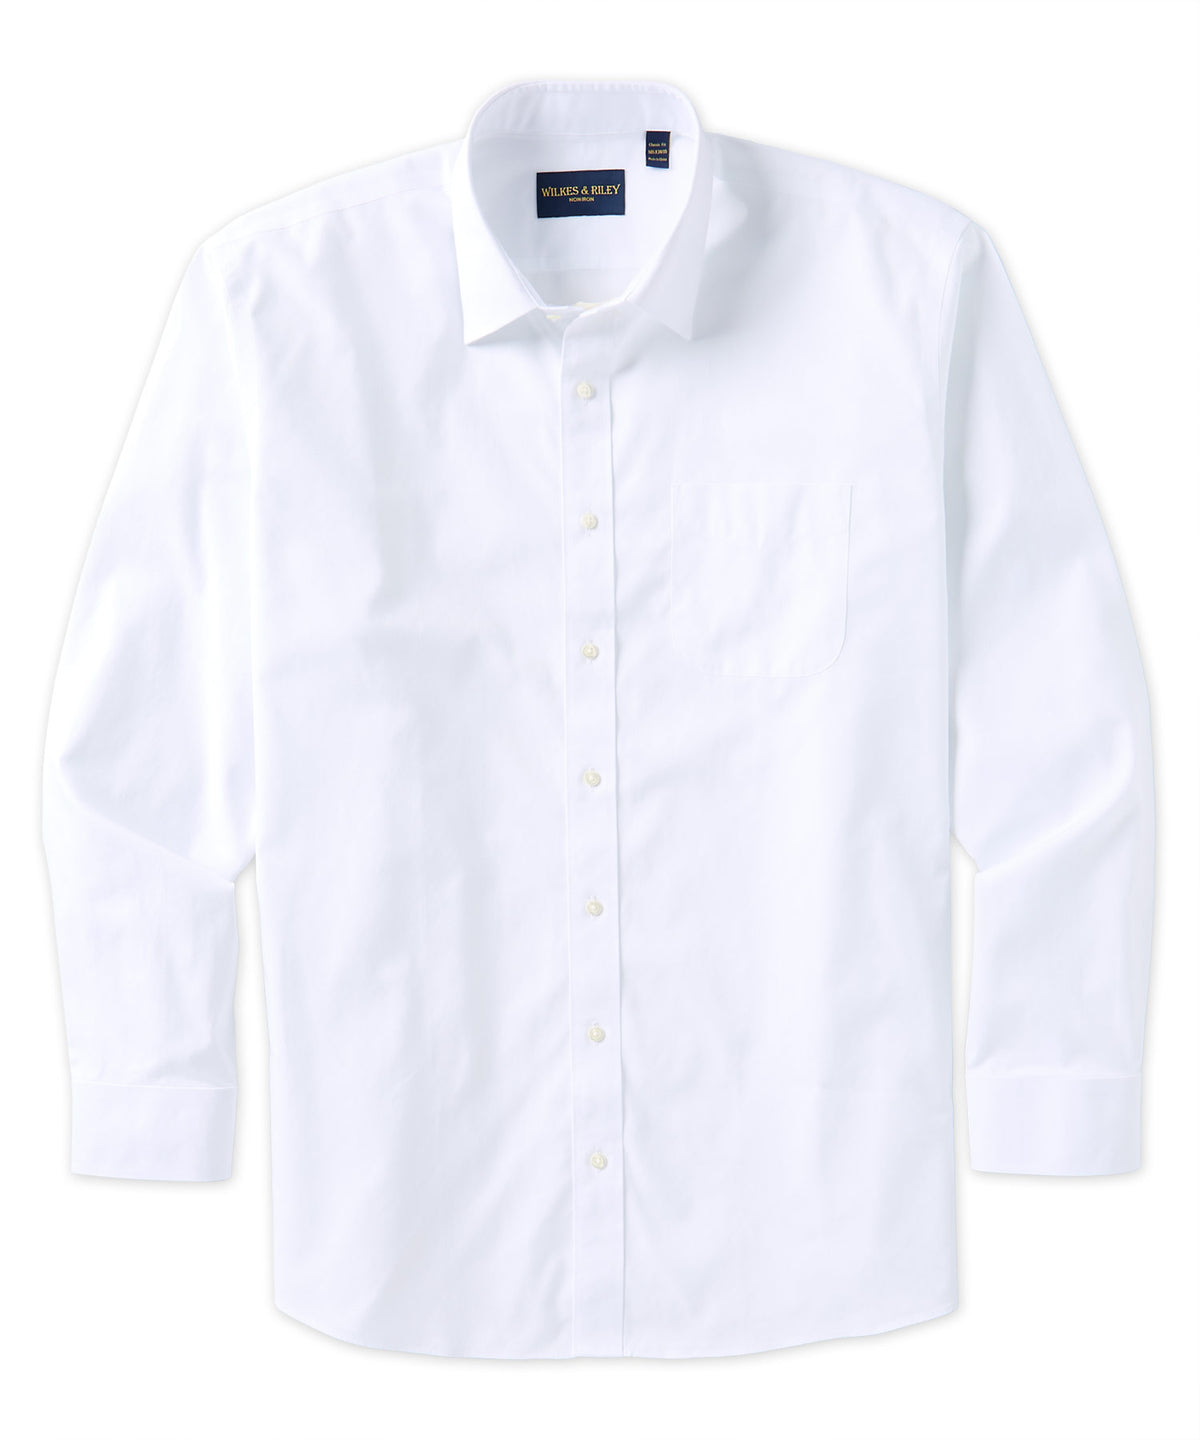 Wilkes &amp; Riley Tailored Fit Spread Collar Dress Shirt